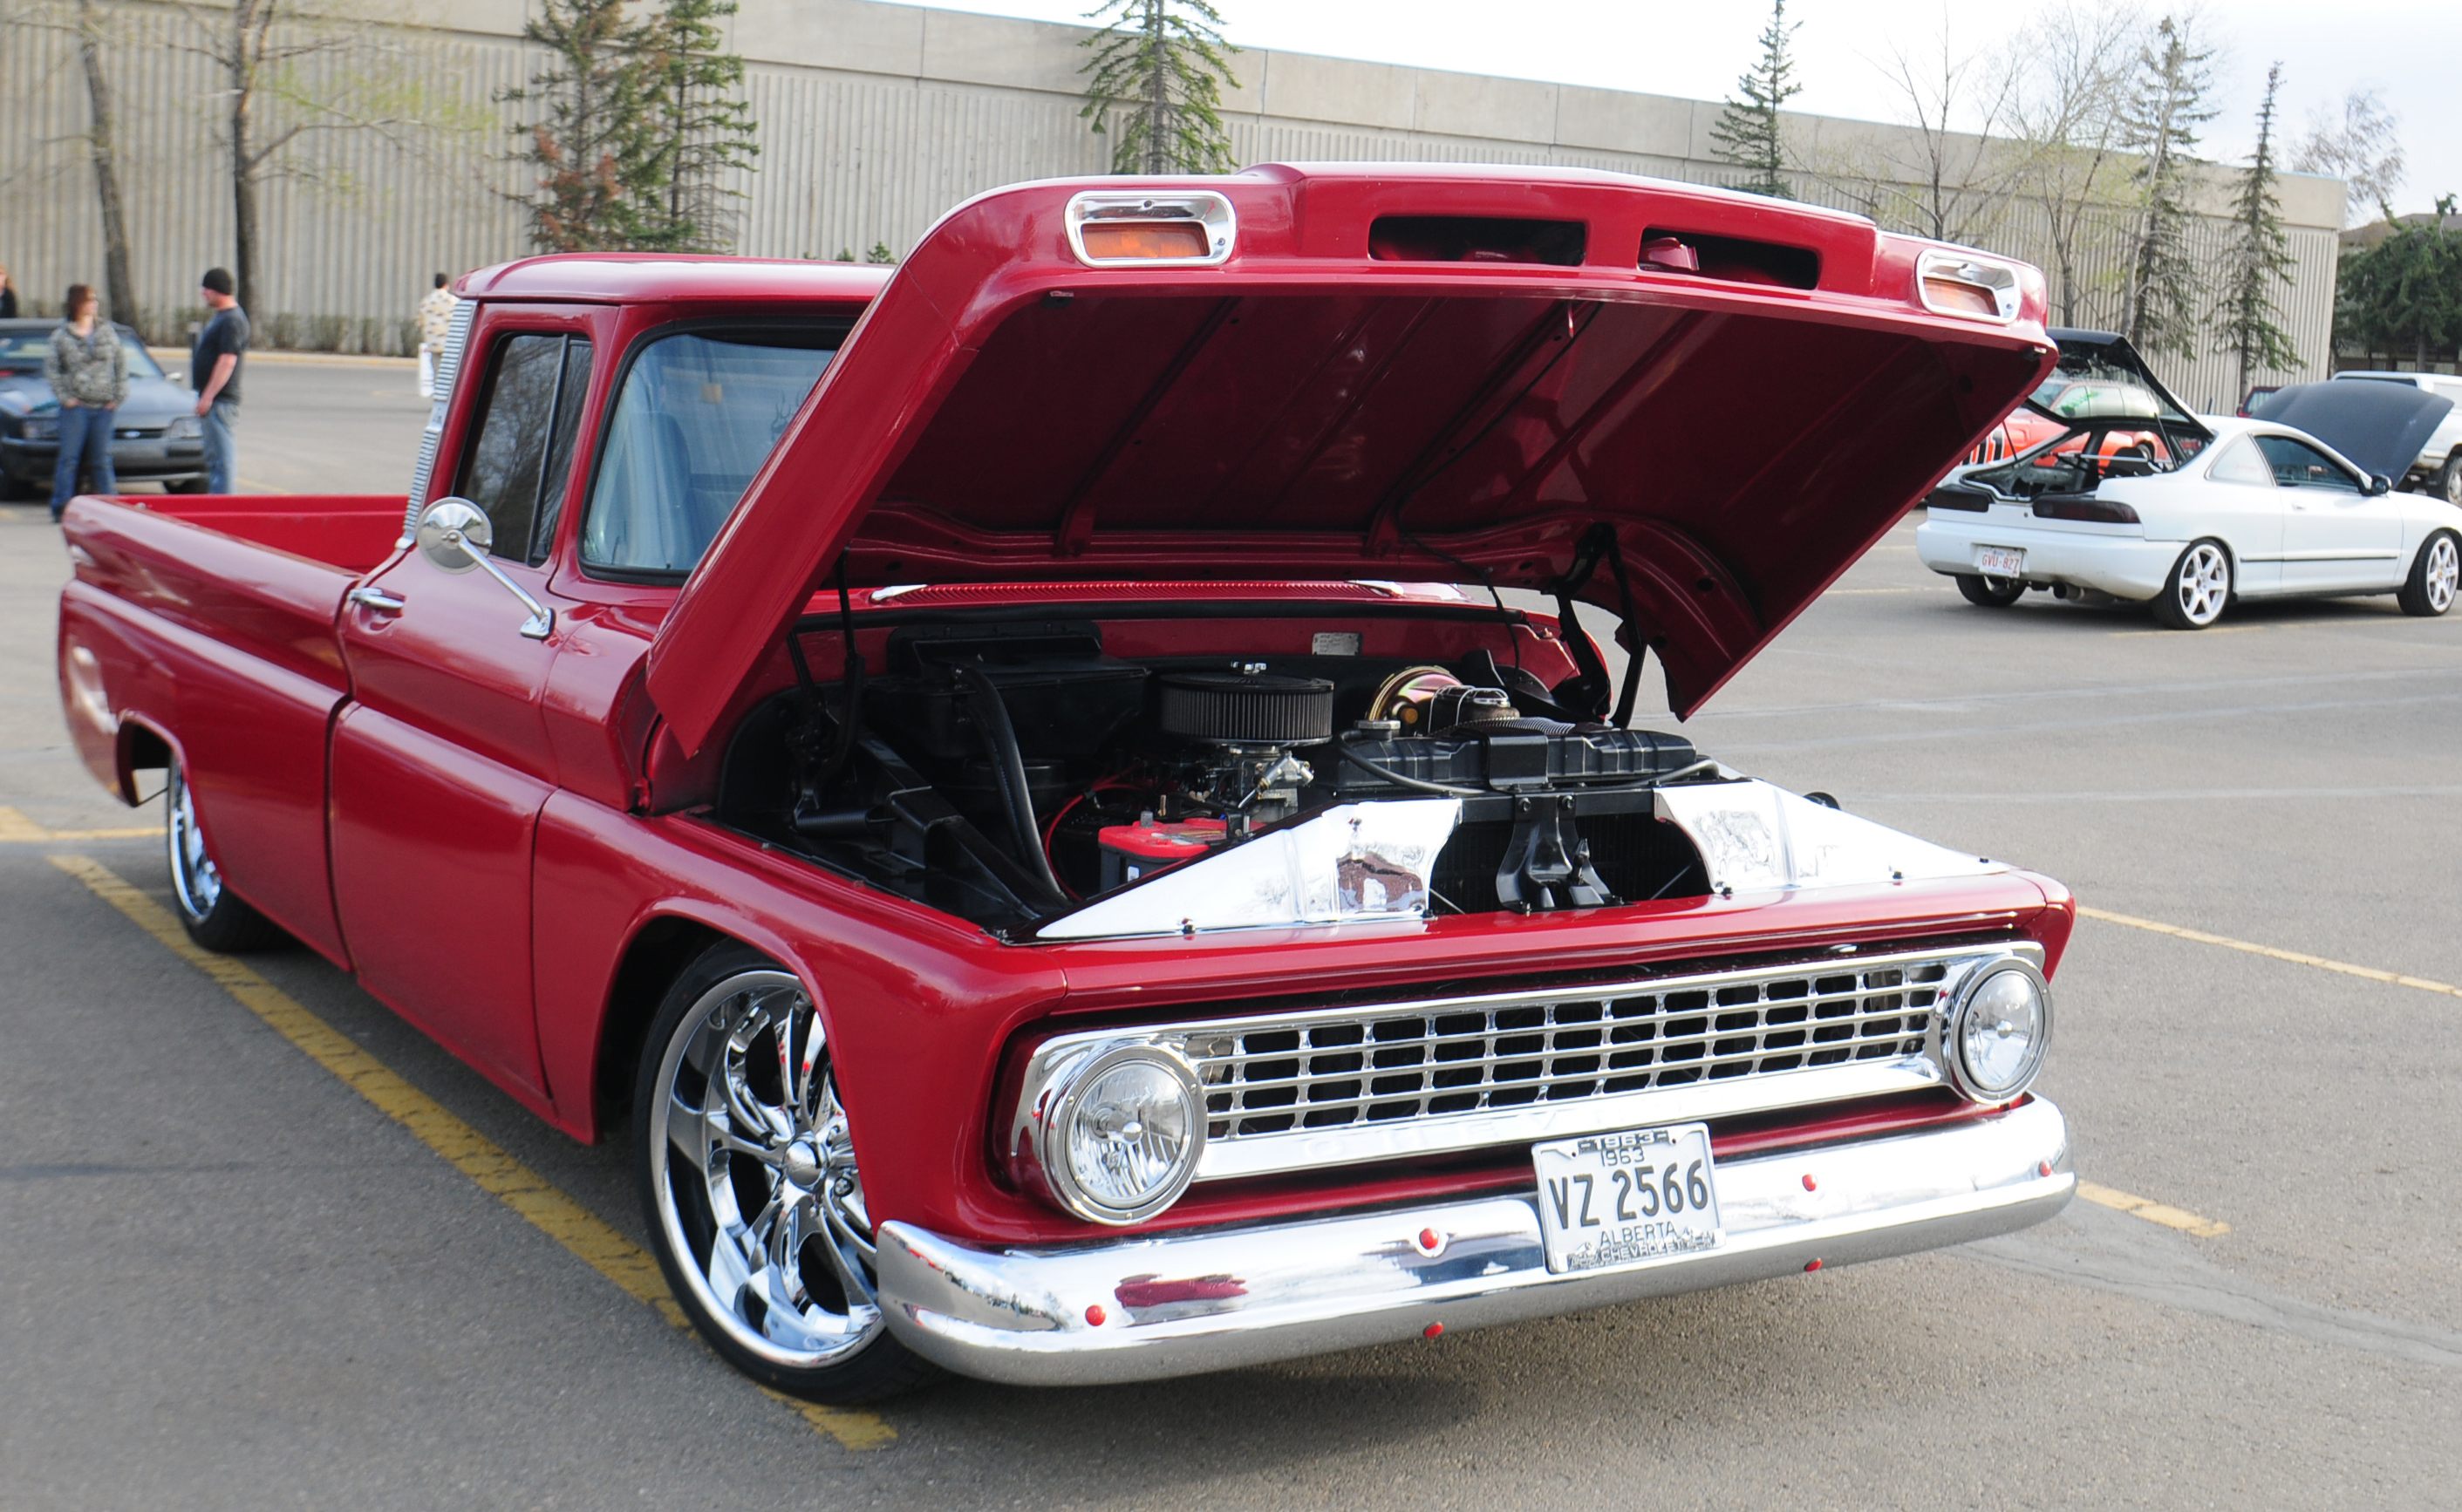 SHINE- A beautiful 1963 Chevrolet truck was drawing attention during Thursday nights cruise night at the north east end of the Parkland Mall parking lot along with other beautiful vehicles.